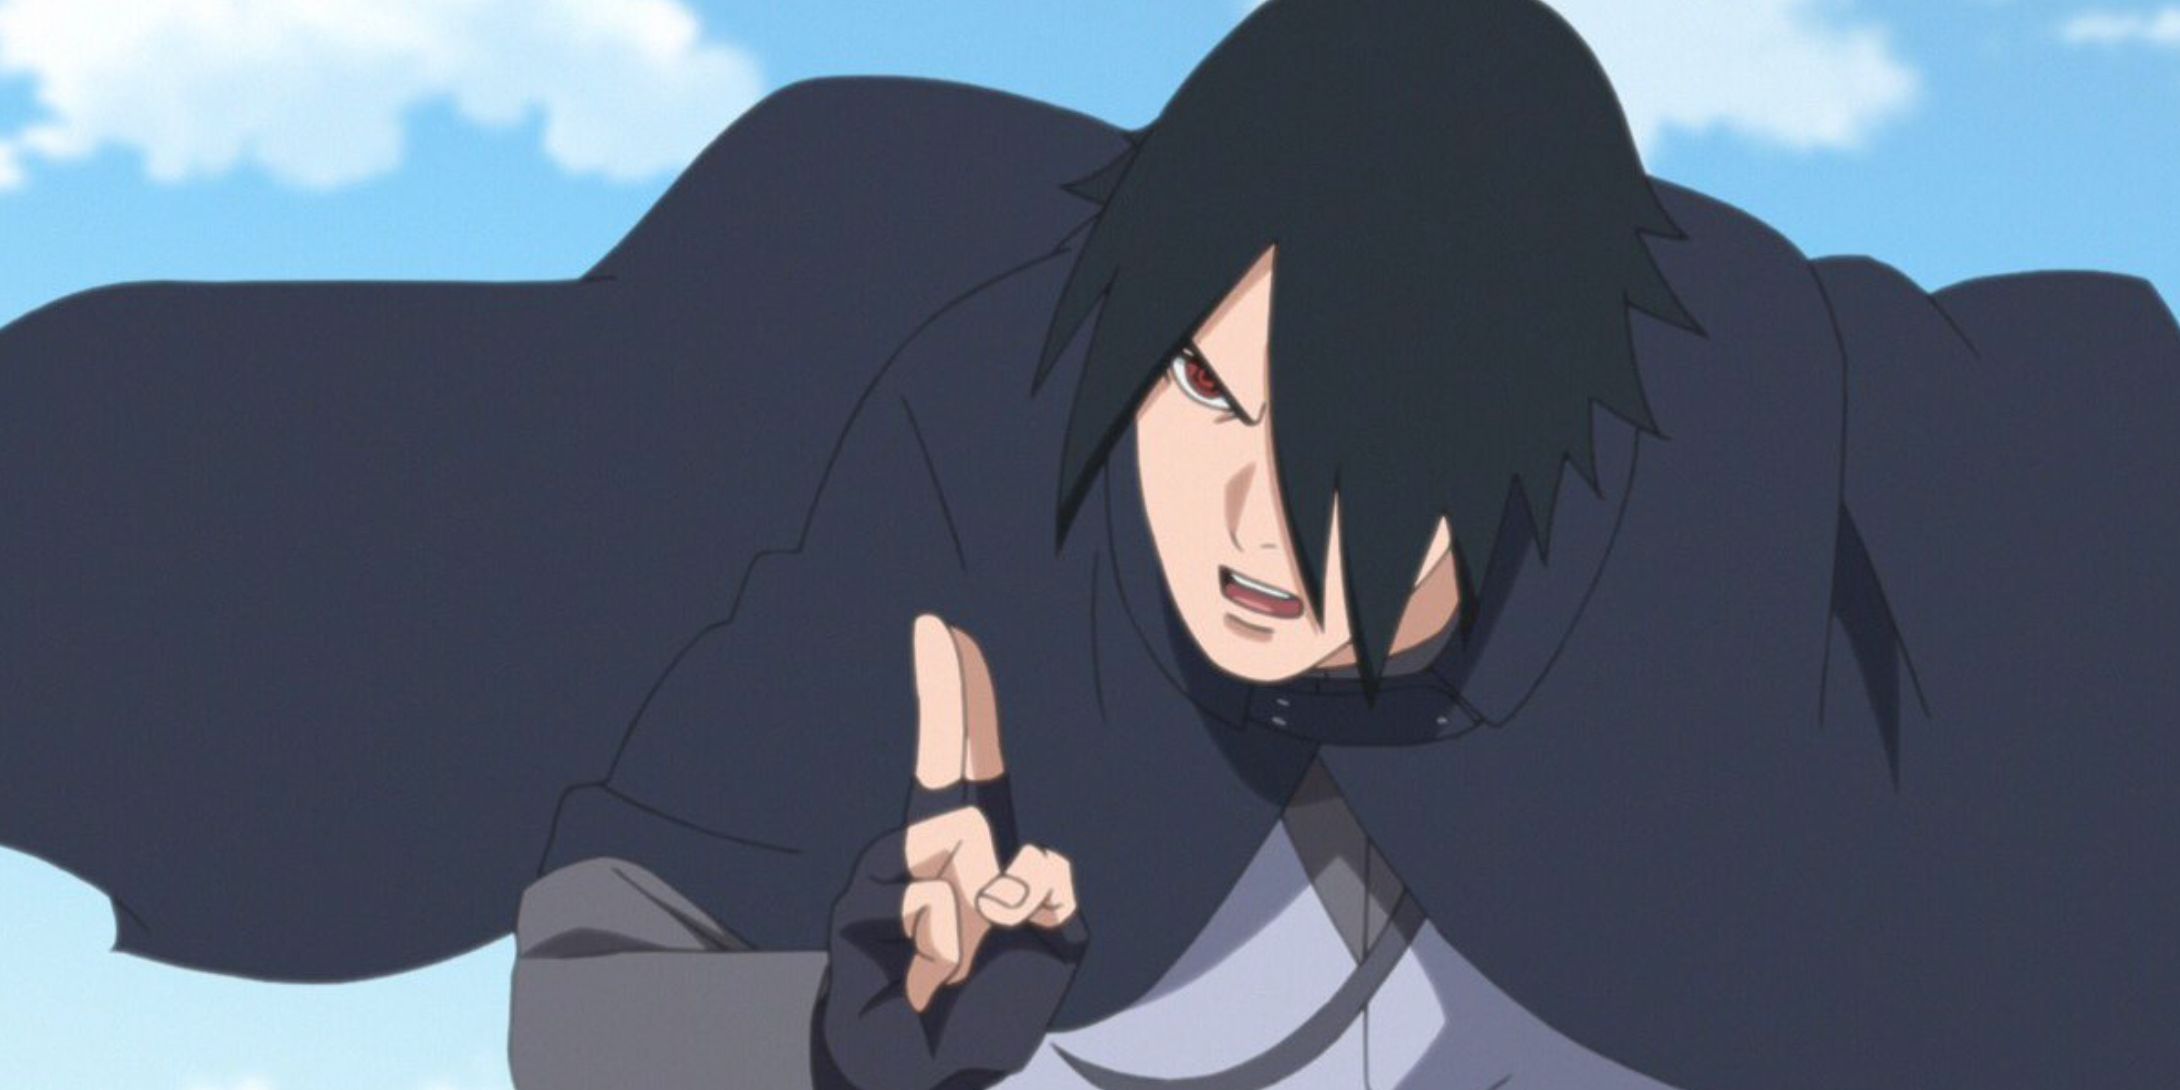 Sasuke appears angry as he points with two fingers in Boruto